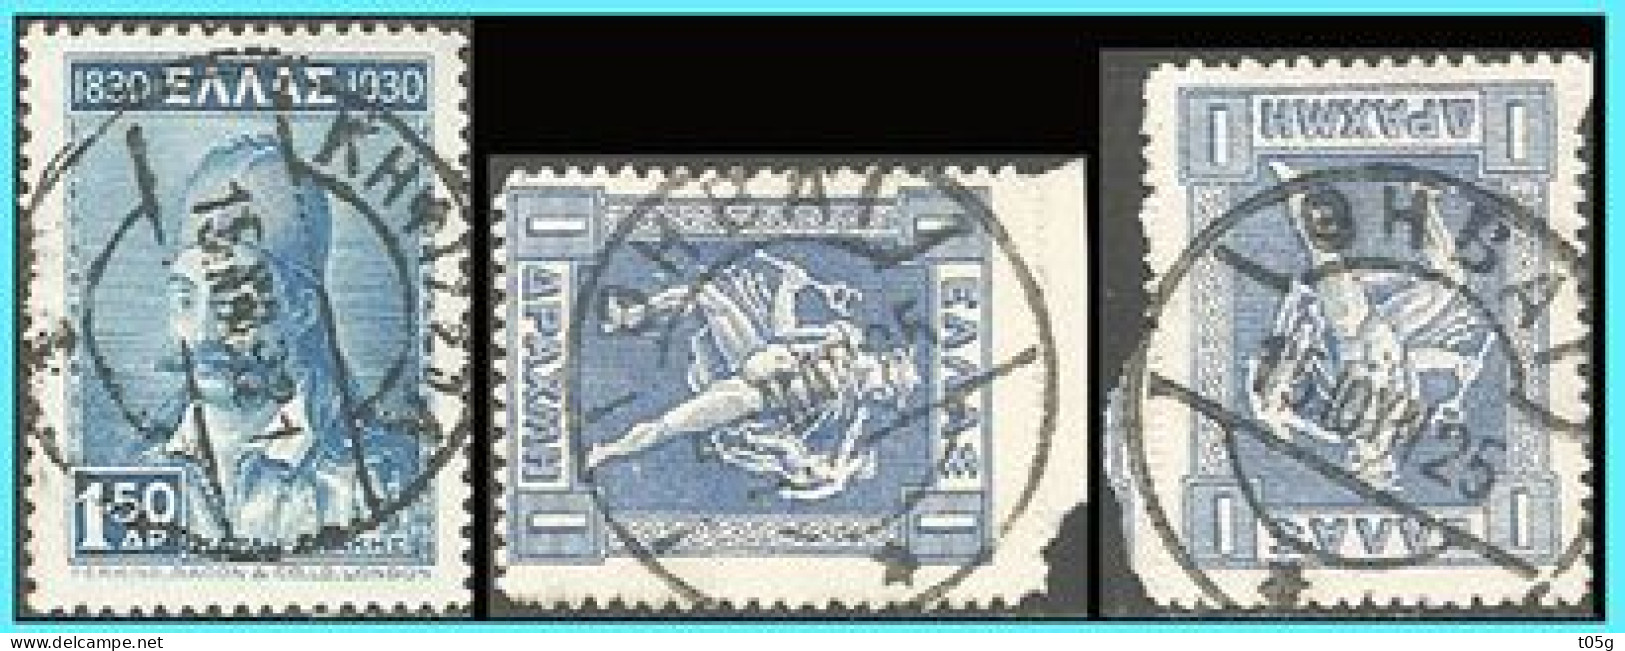 GREECE-GRECE- HELLAS 1913: Canc. (ΚΗΦΙΣΙΑ ΝΟΕ 21) (ΘΗΒΑΙ 1 ΙΟΥΝ 25) On 1drx Lithographic  used - Oblitérés